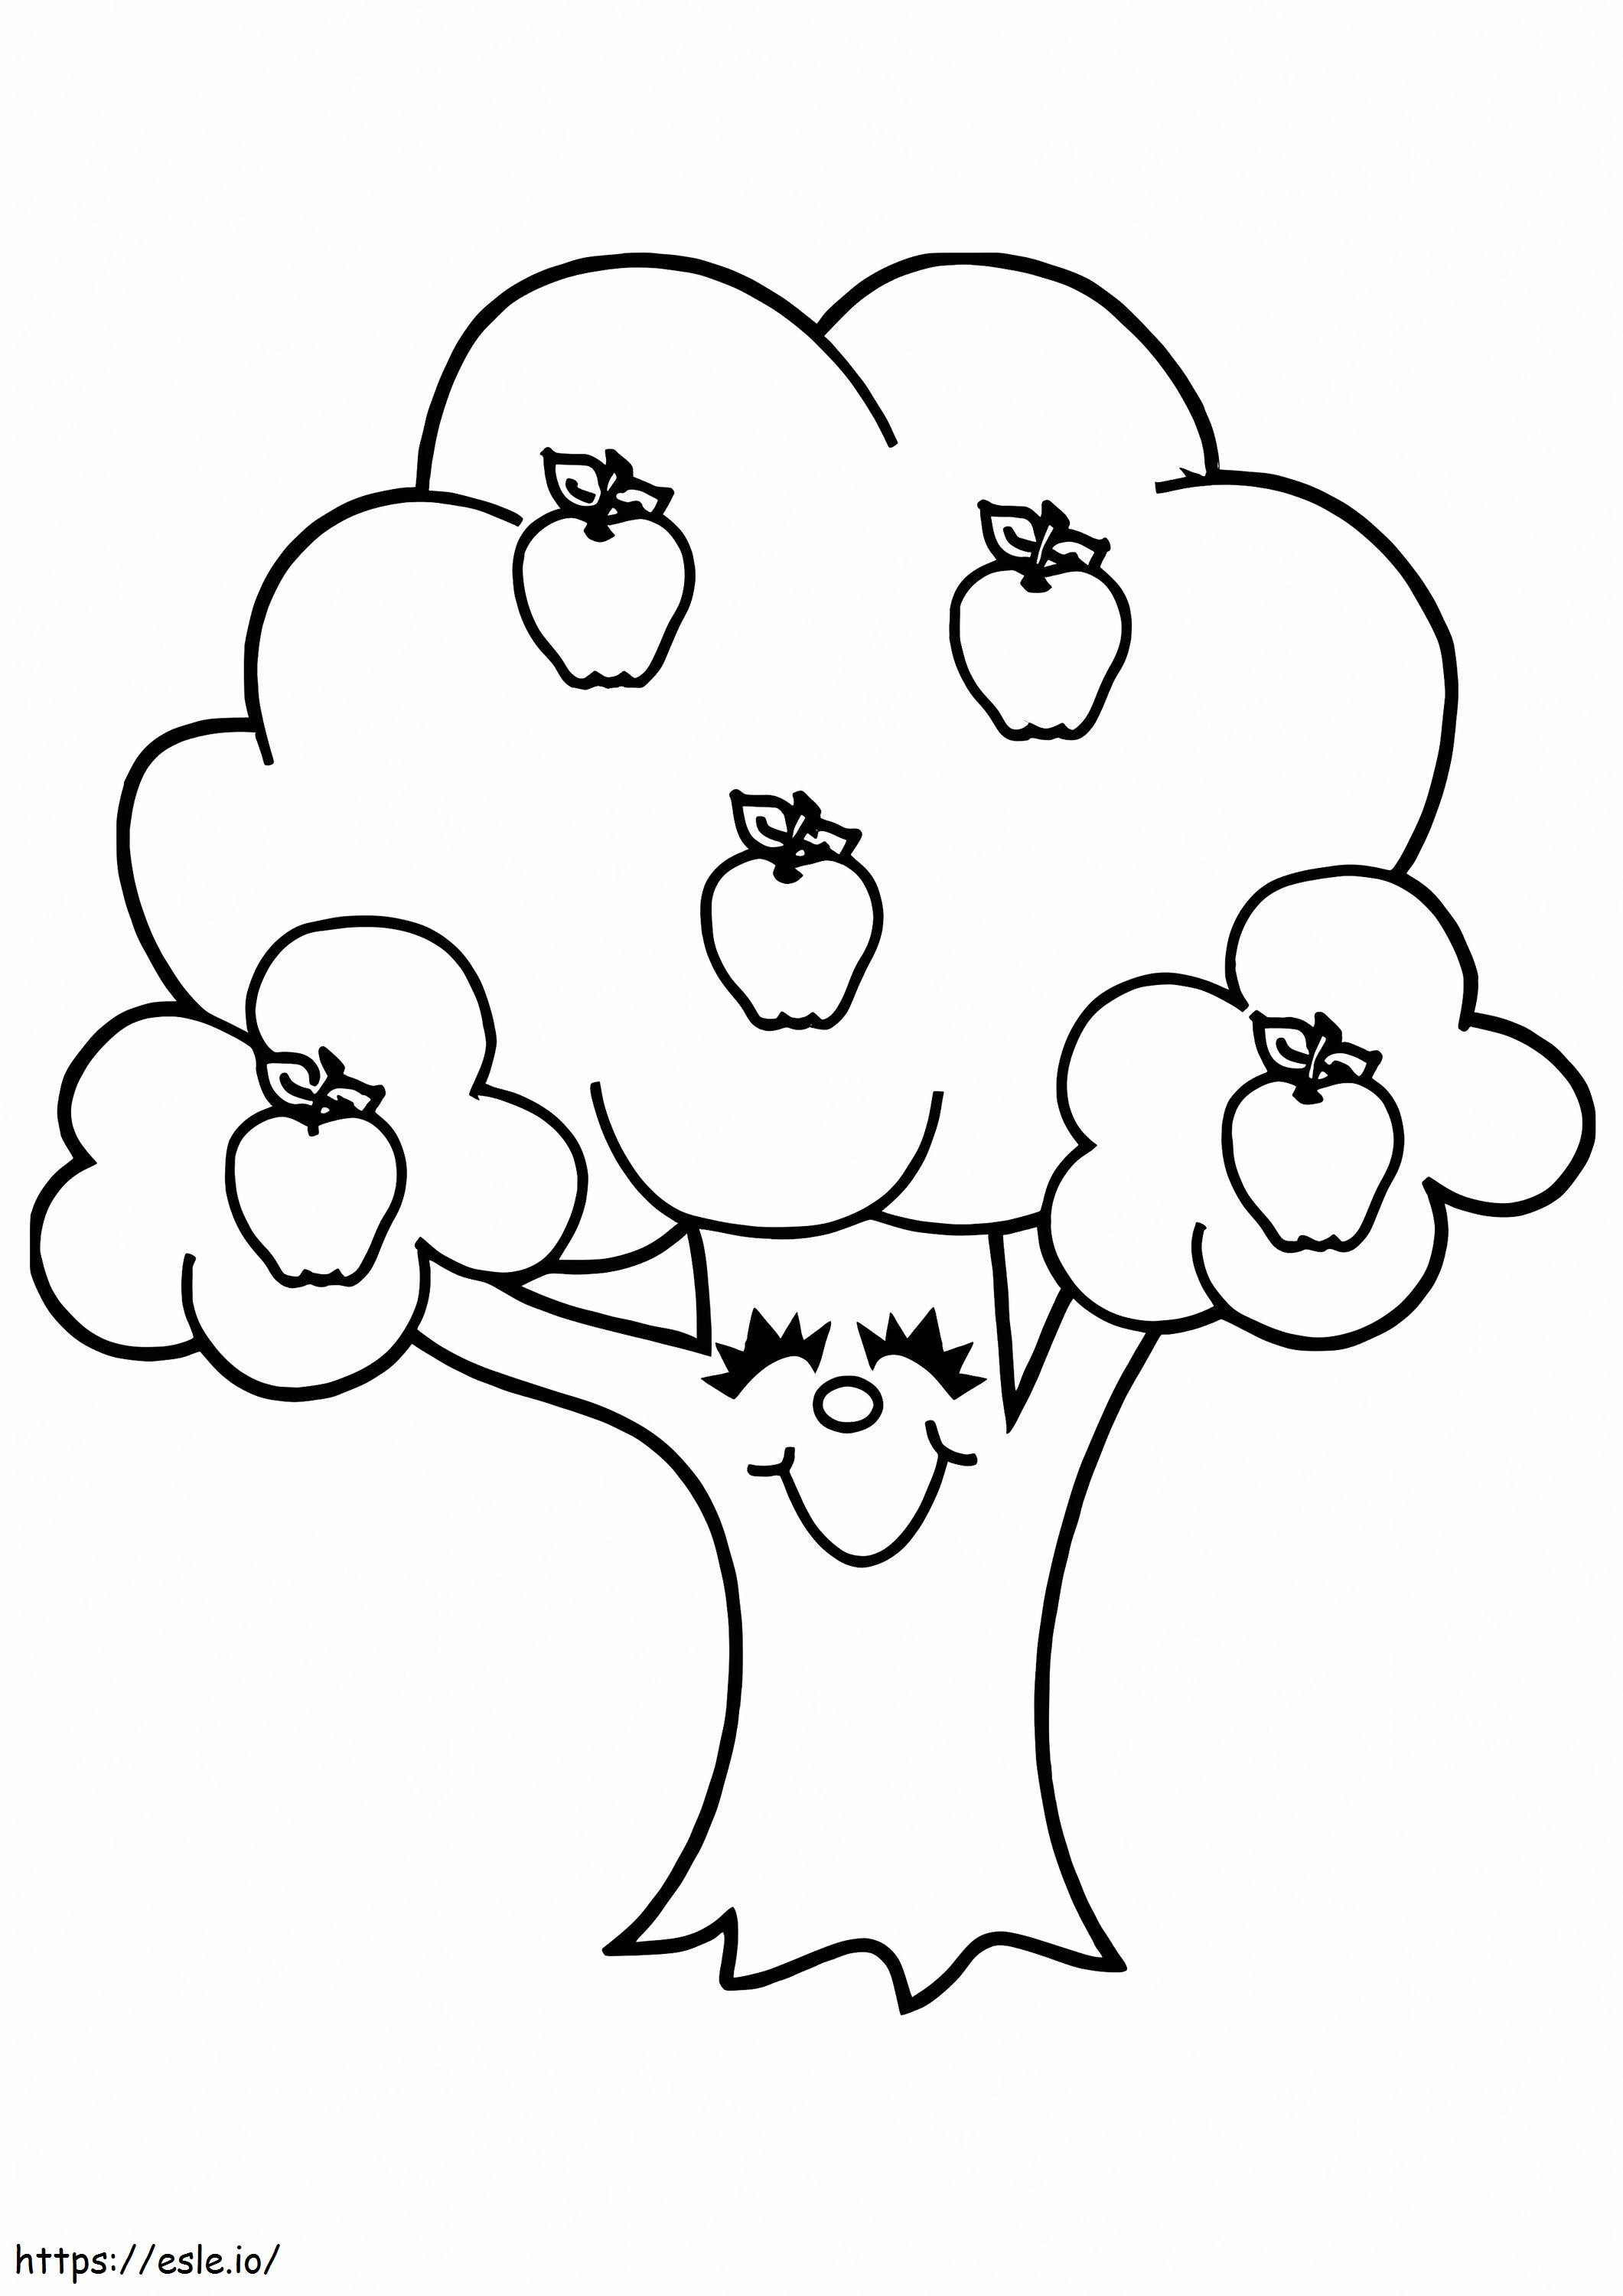 Smiling Apple Tree coloring page